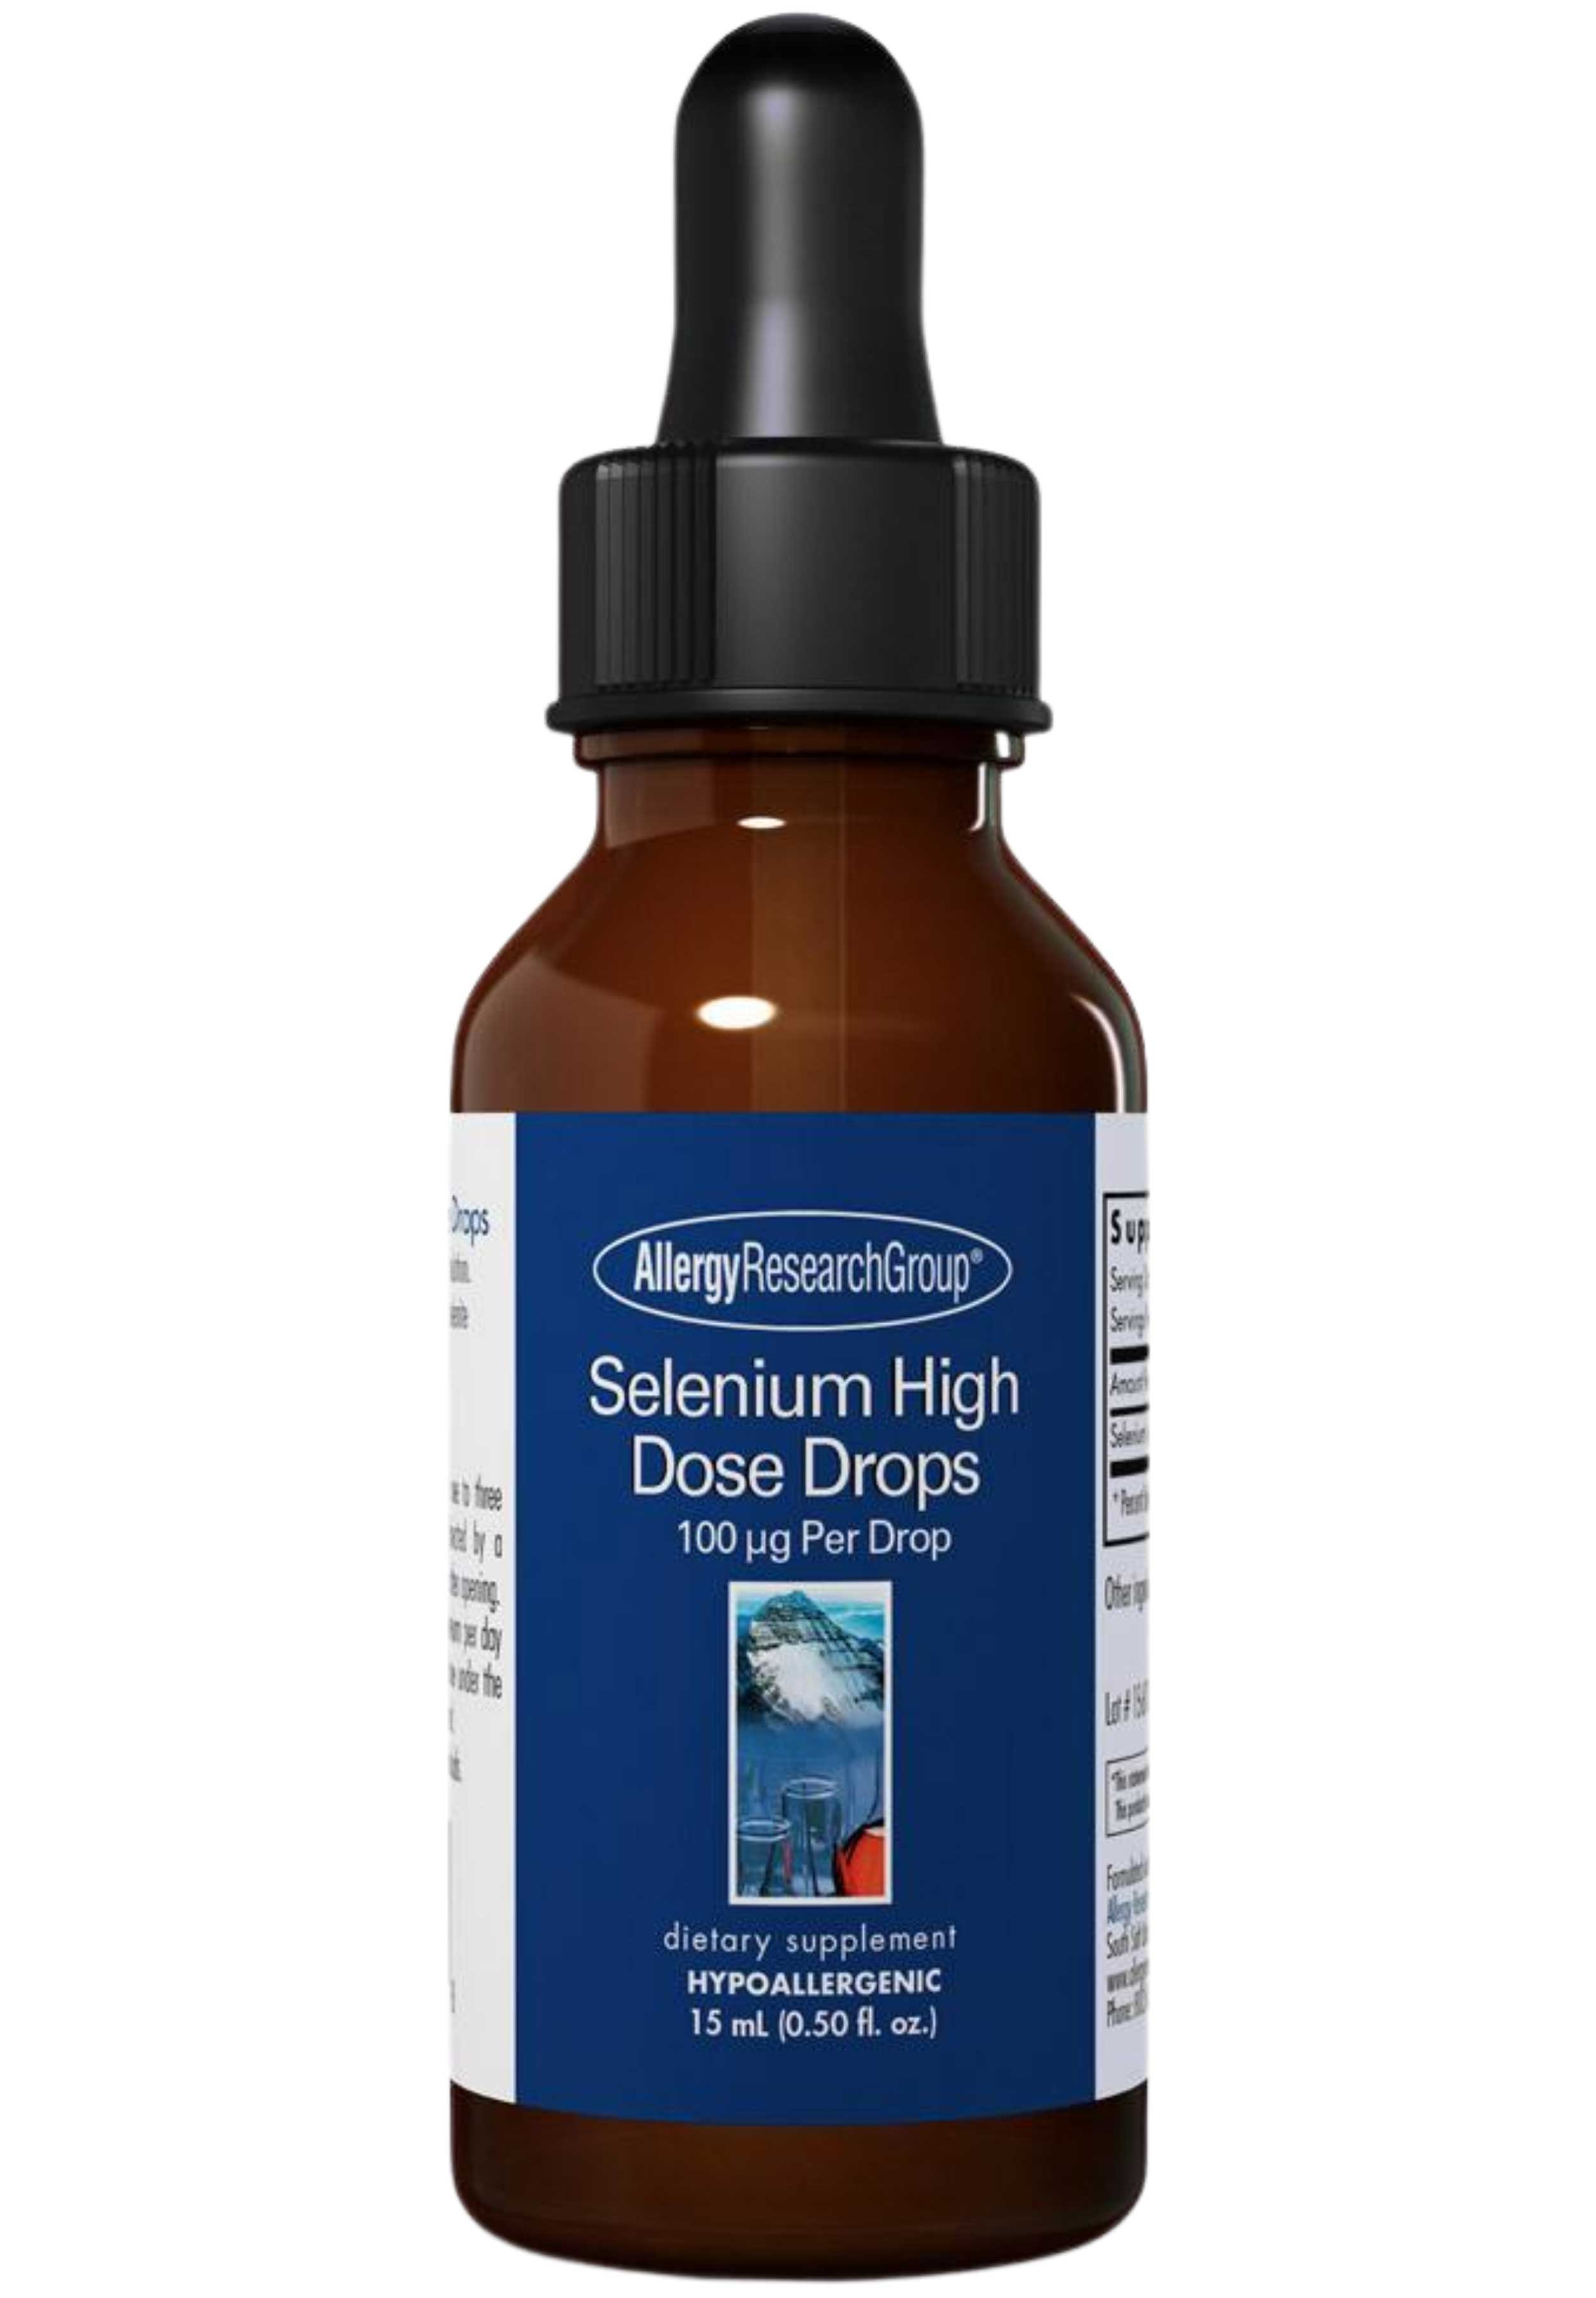 Allergy Research Group Selenium High Dose Drops